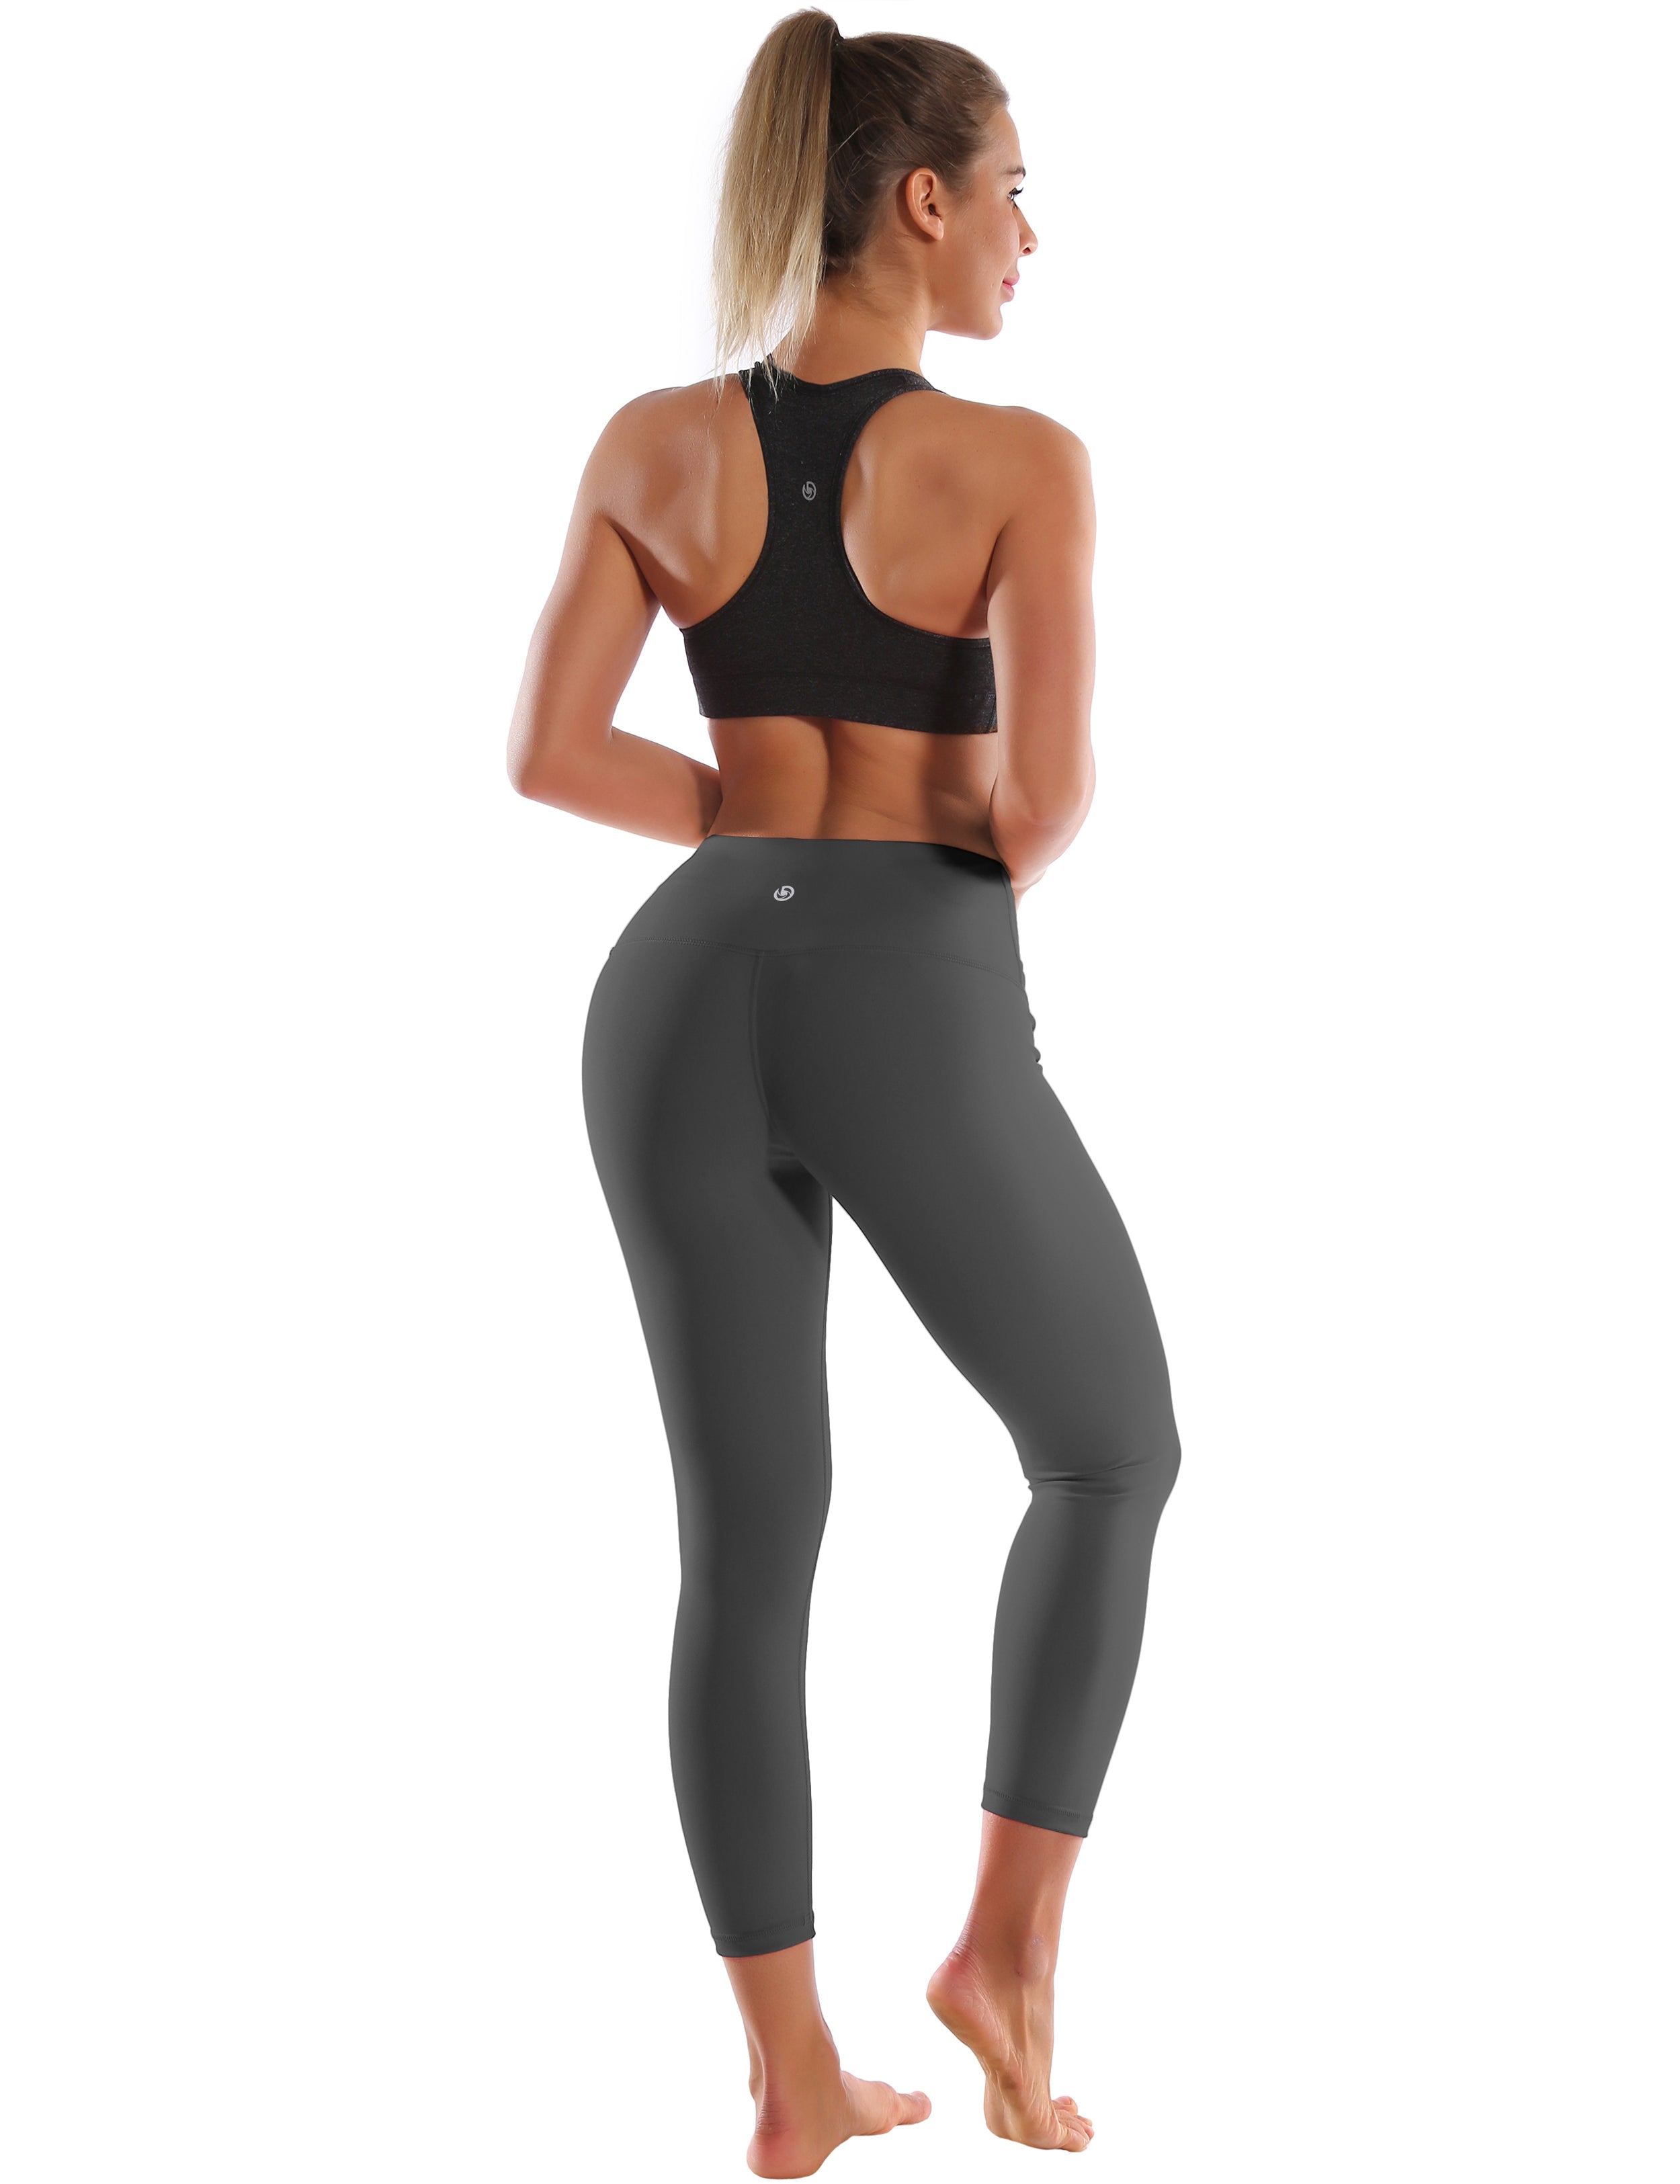 22" High Waist Crop Tight Capris shadowcharcoal 75%Nylon/25%Spandex Fabric doesn't attract lint easily 4-way stretch No see-through Moisture-wicking Tummy control Inner pocket